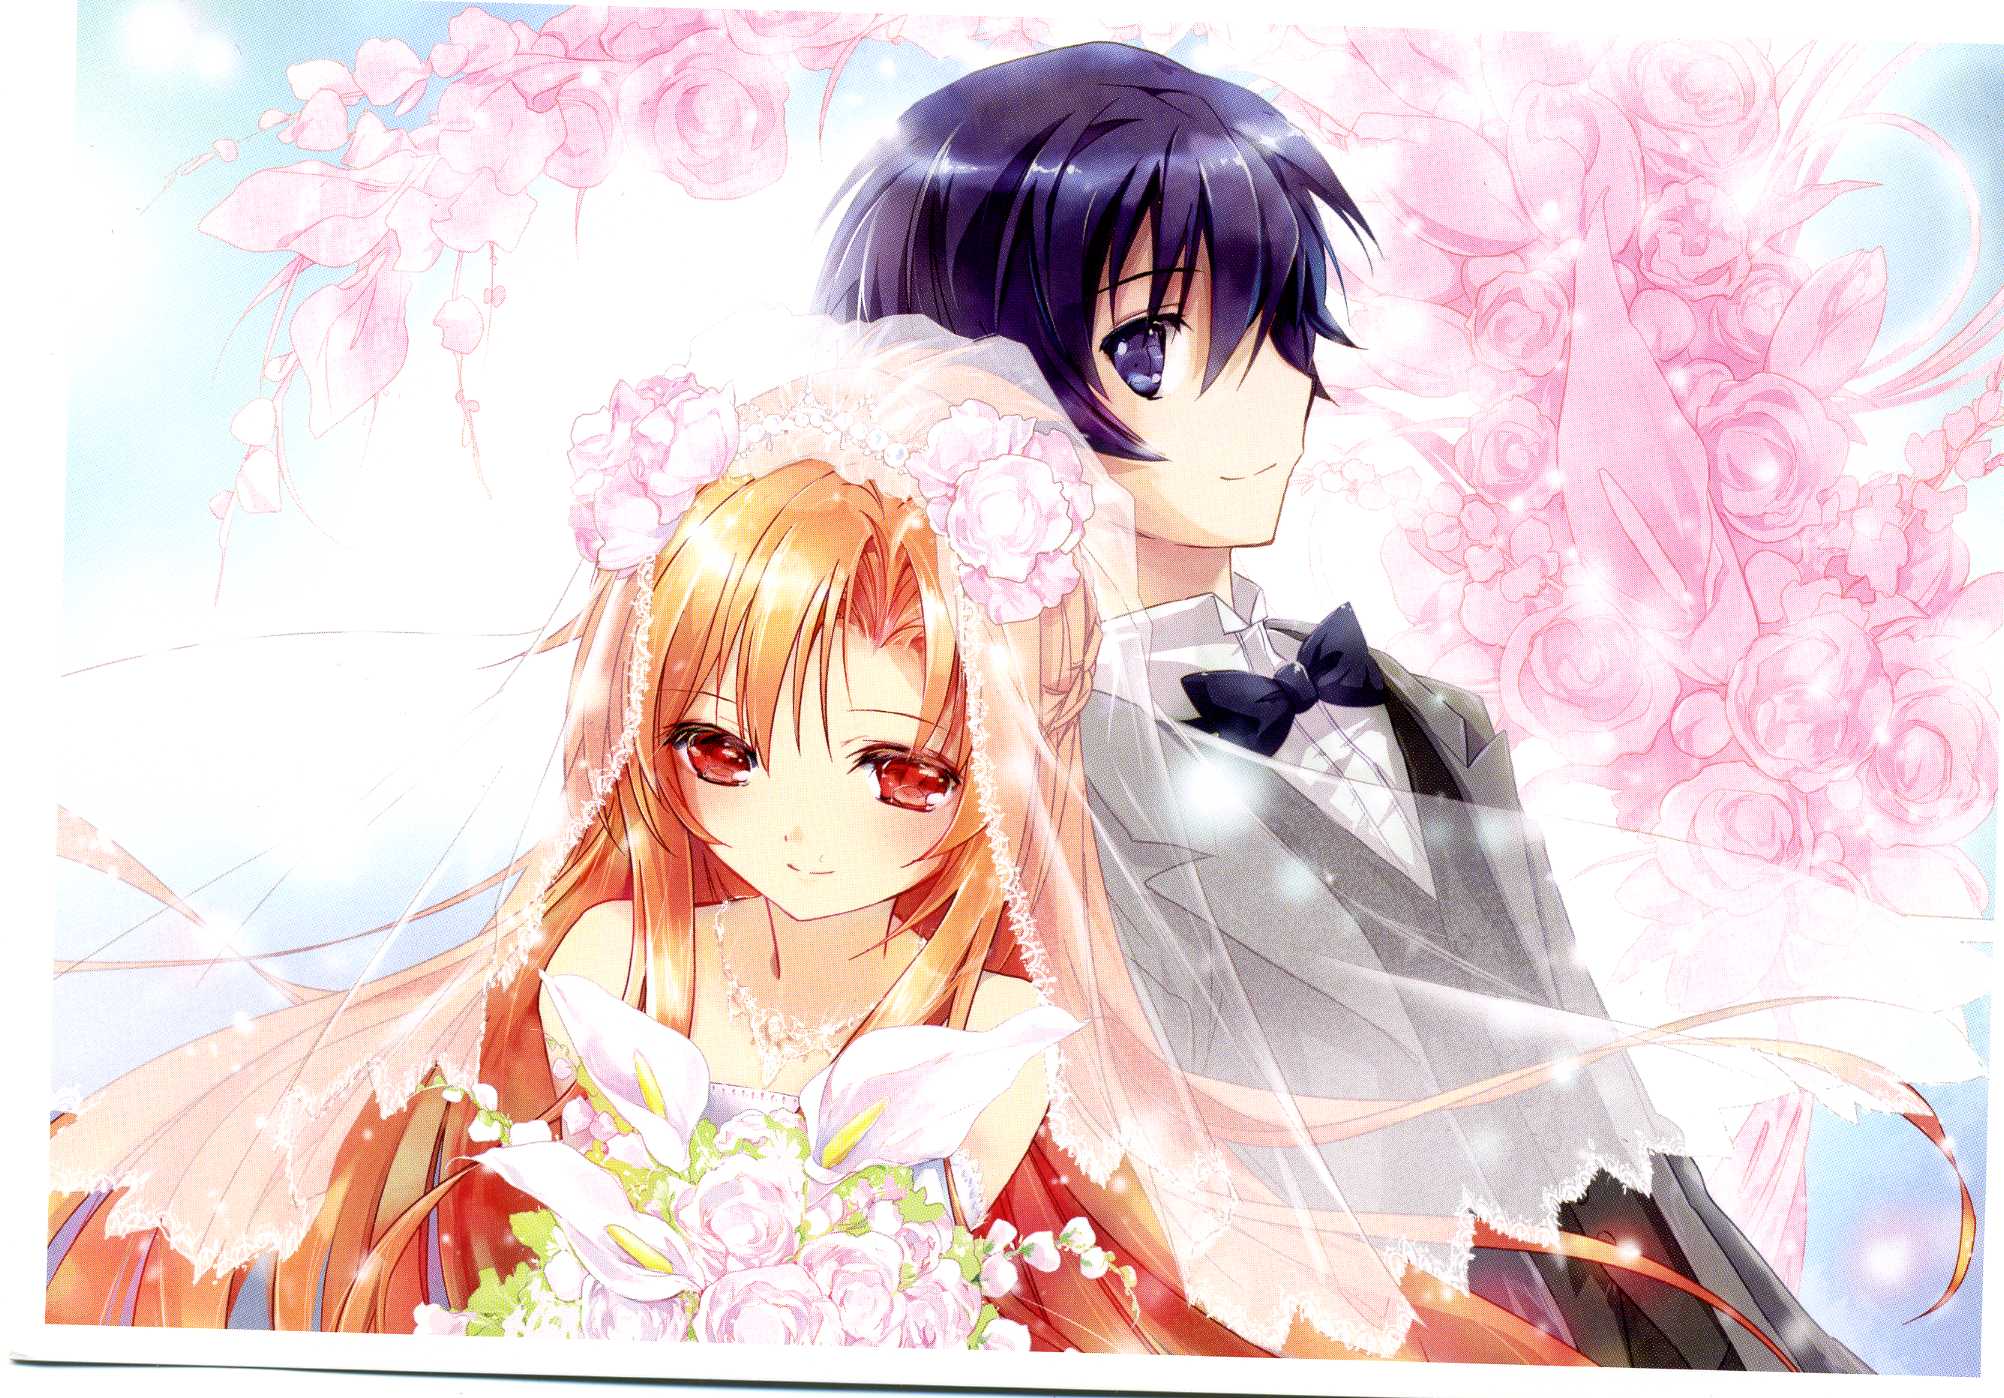 Are you looking for anime couple wallpaper or SAO